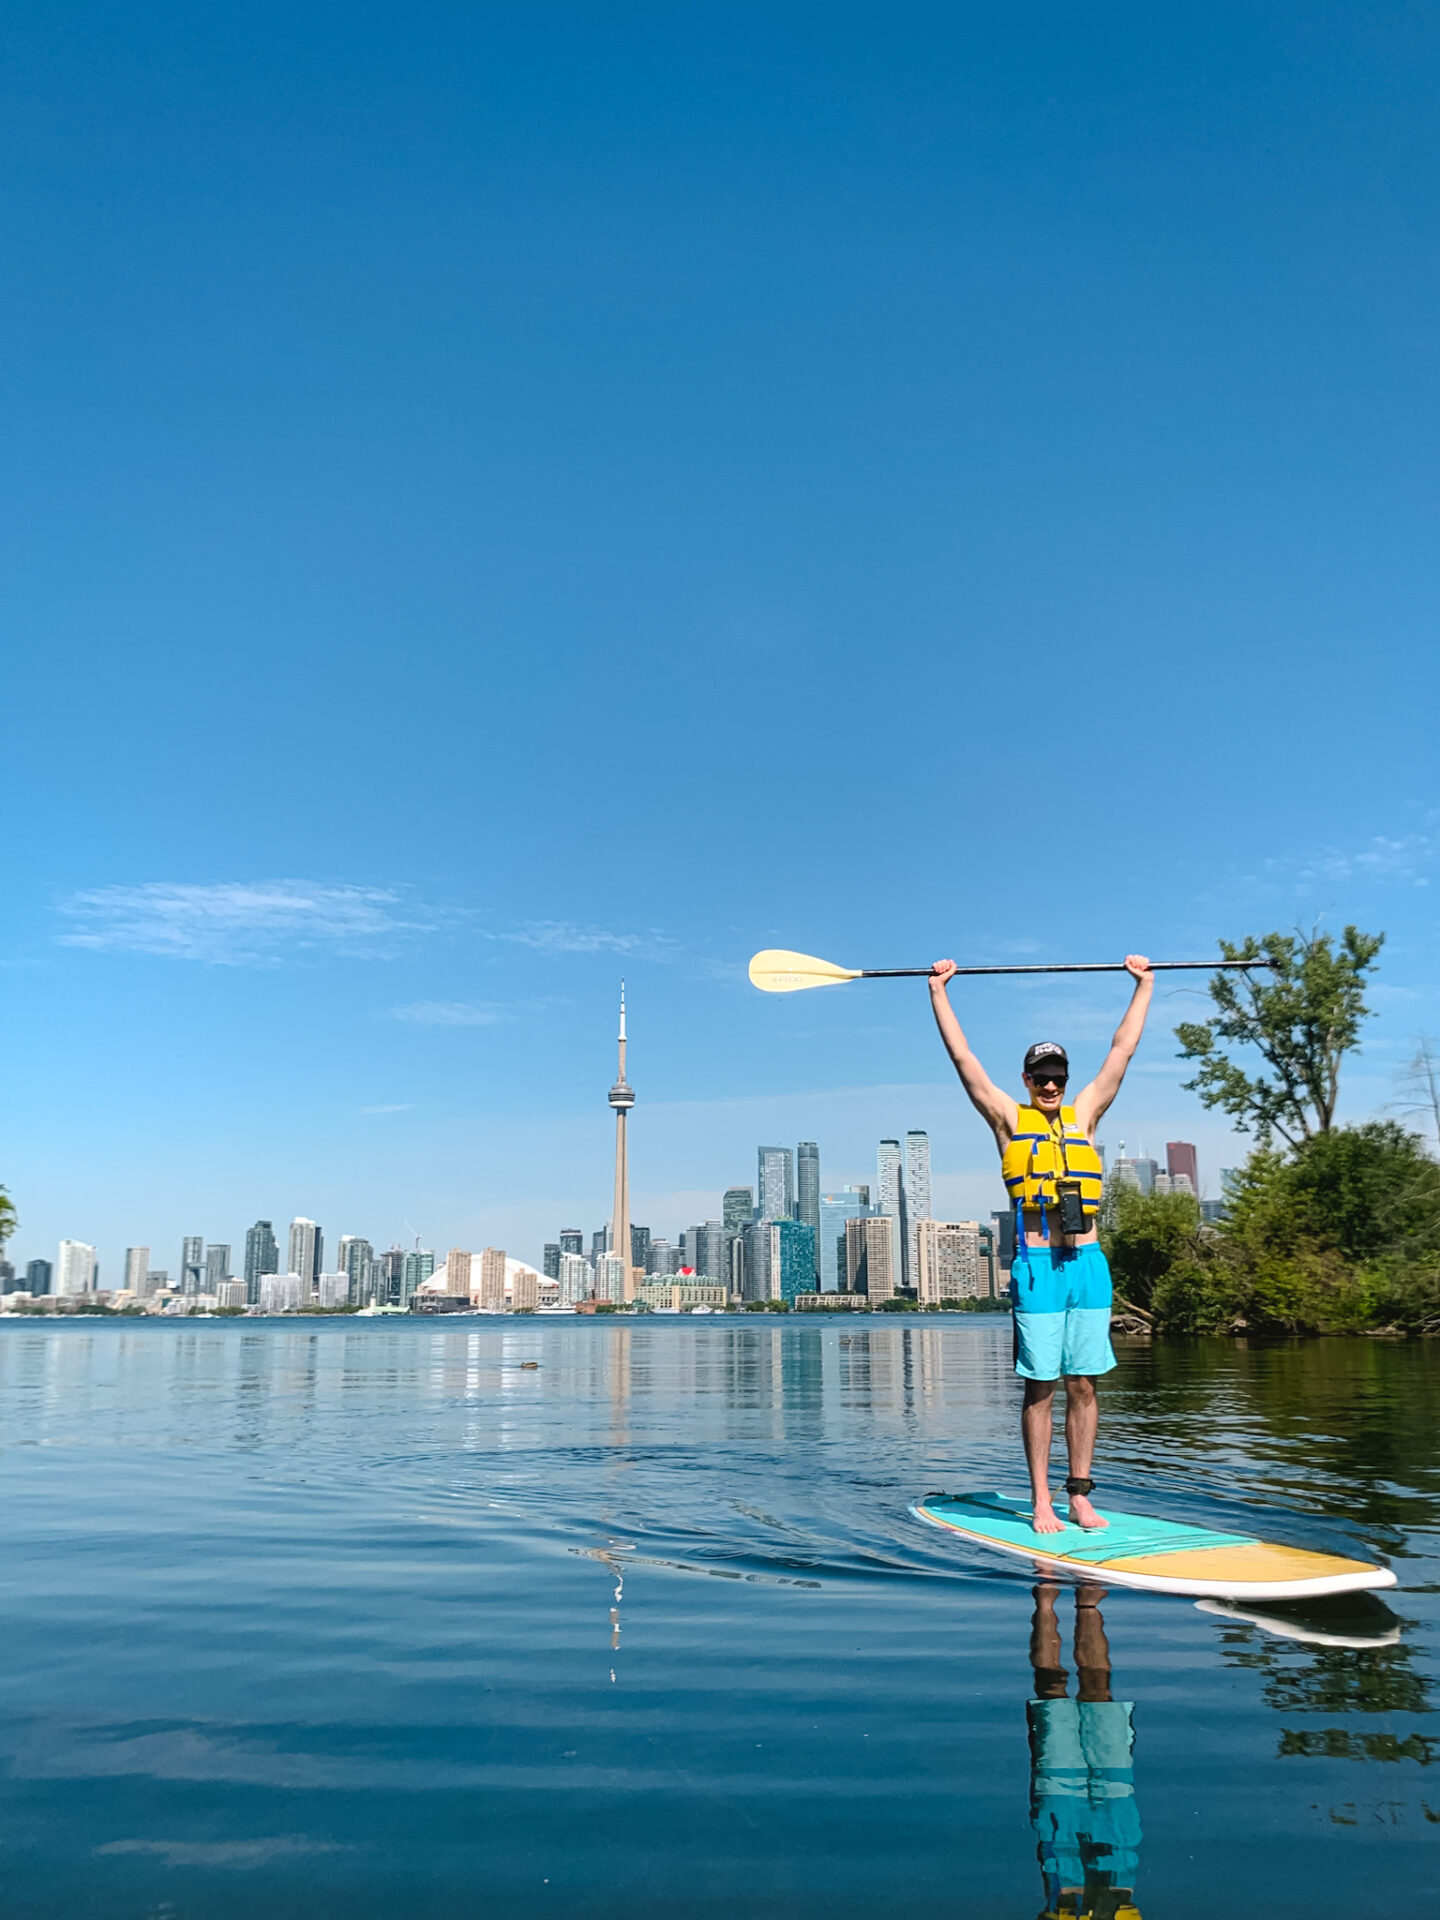 Stand-up paddle boarding at the Toronto Islands